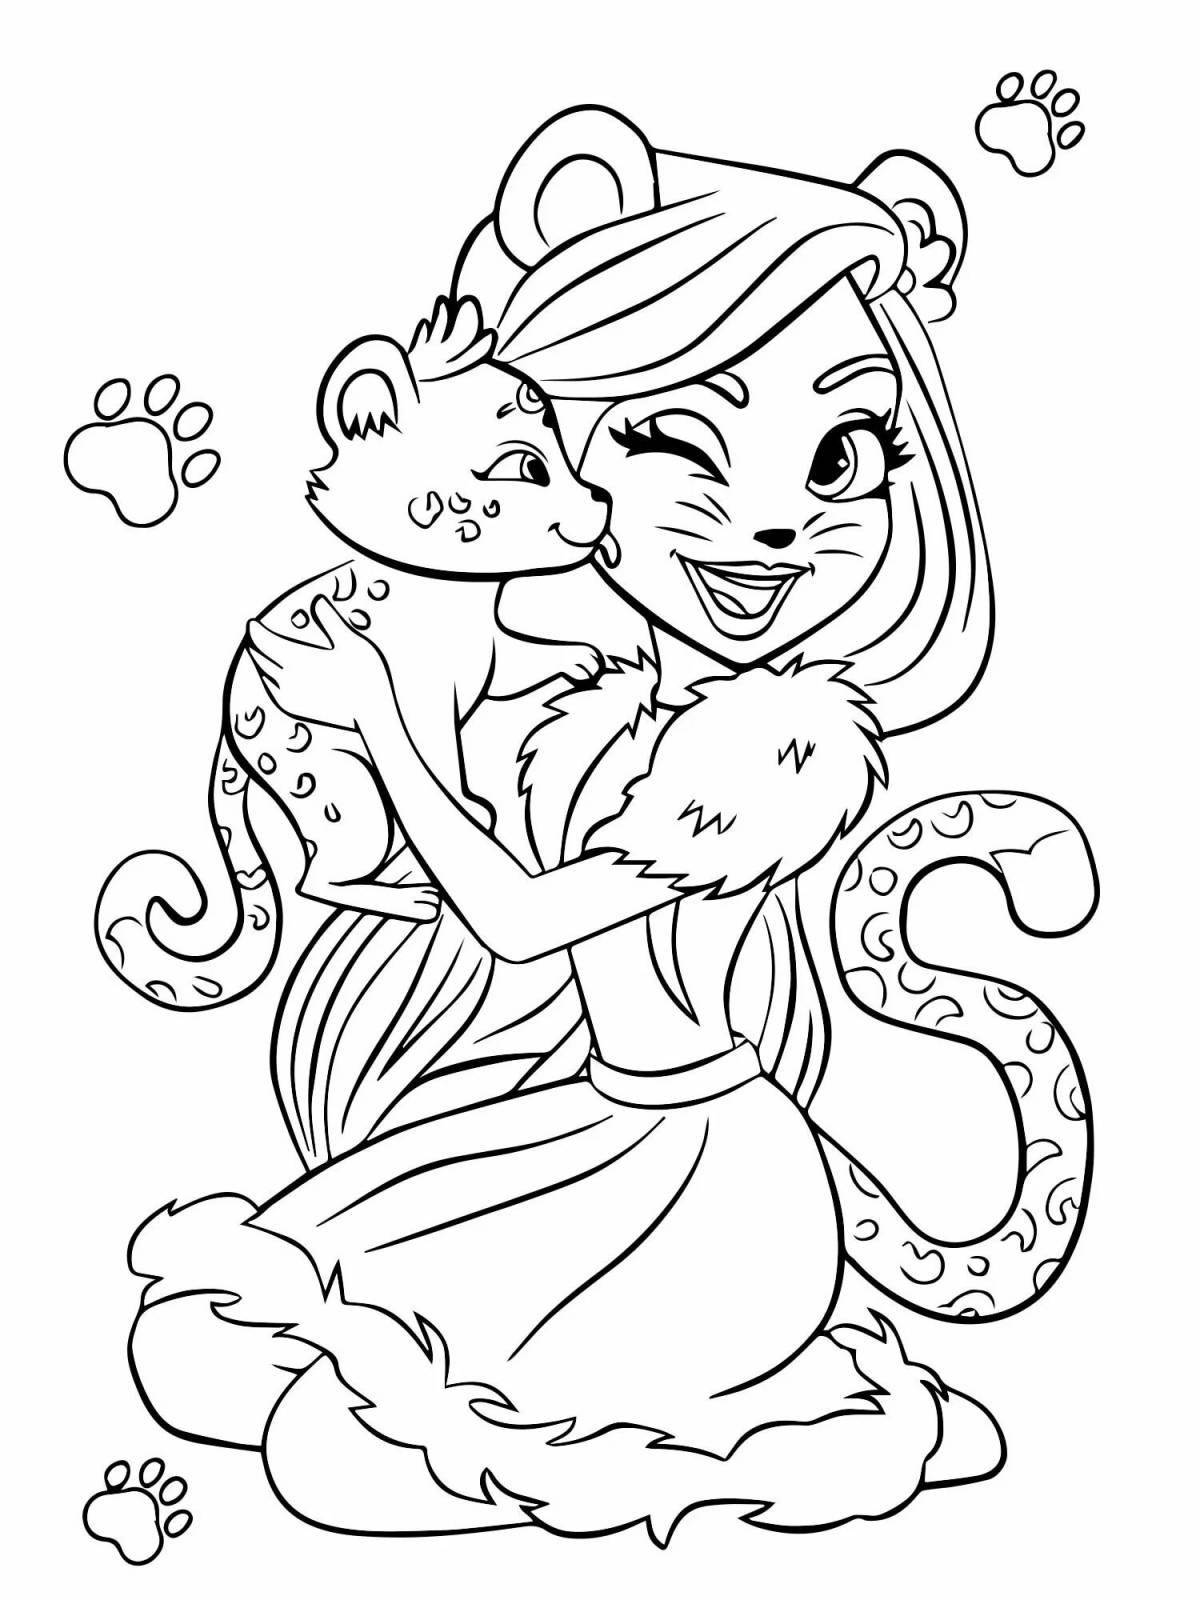 Coloring page amiable cat felicity